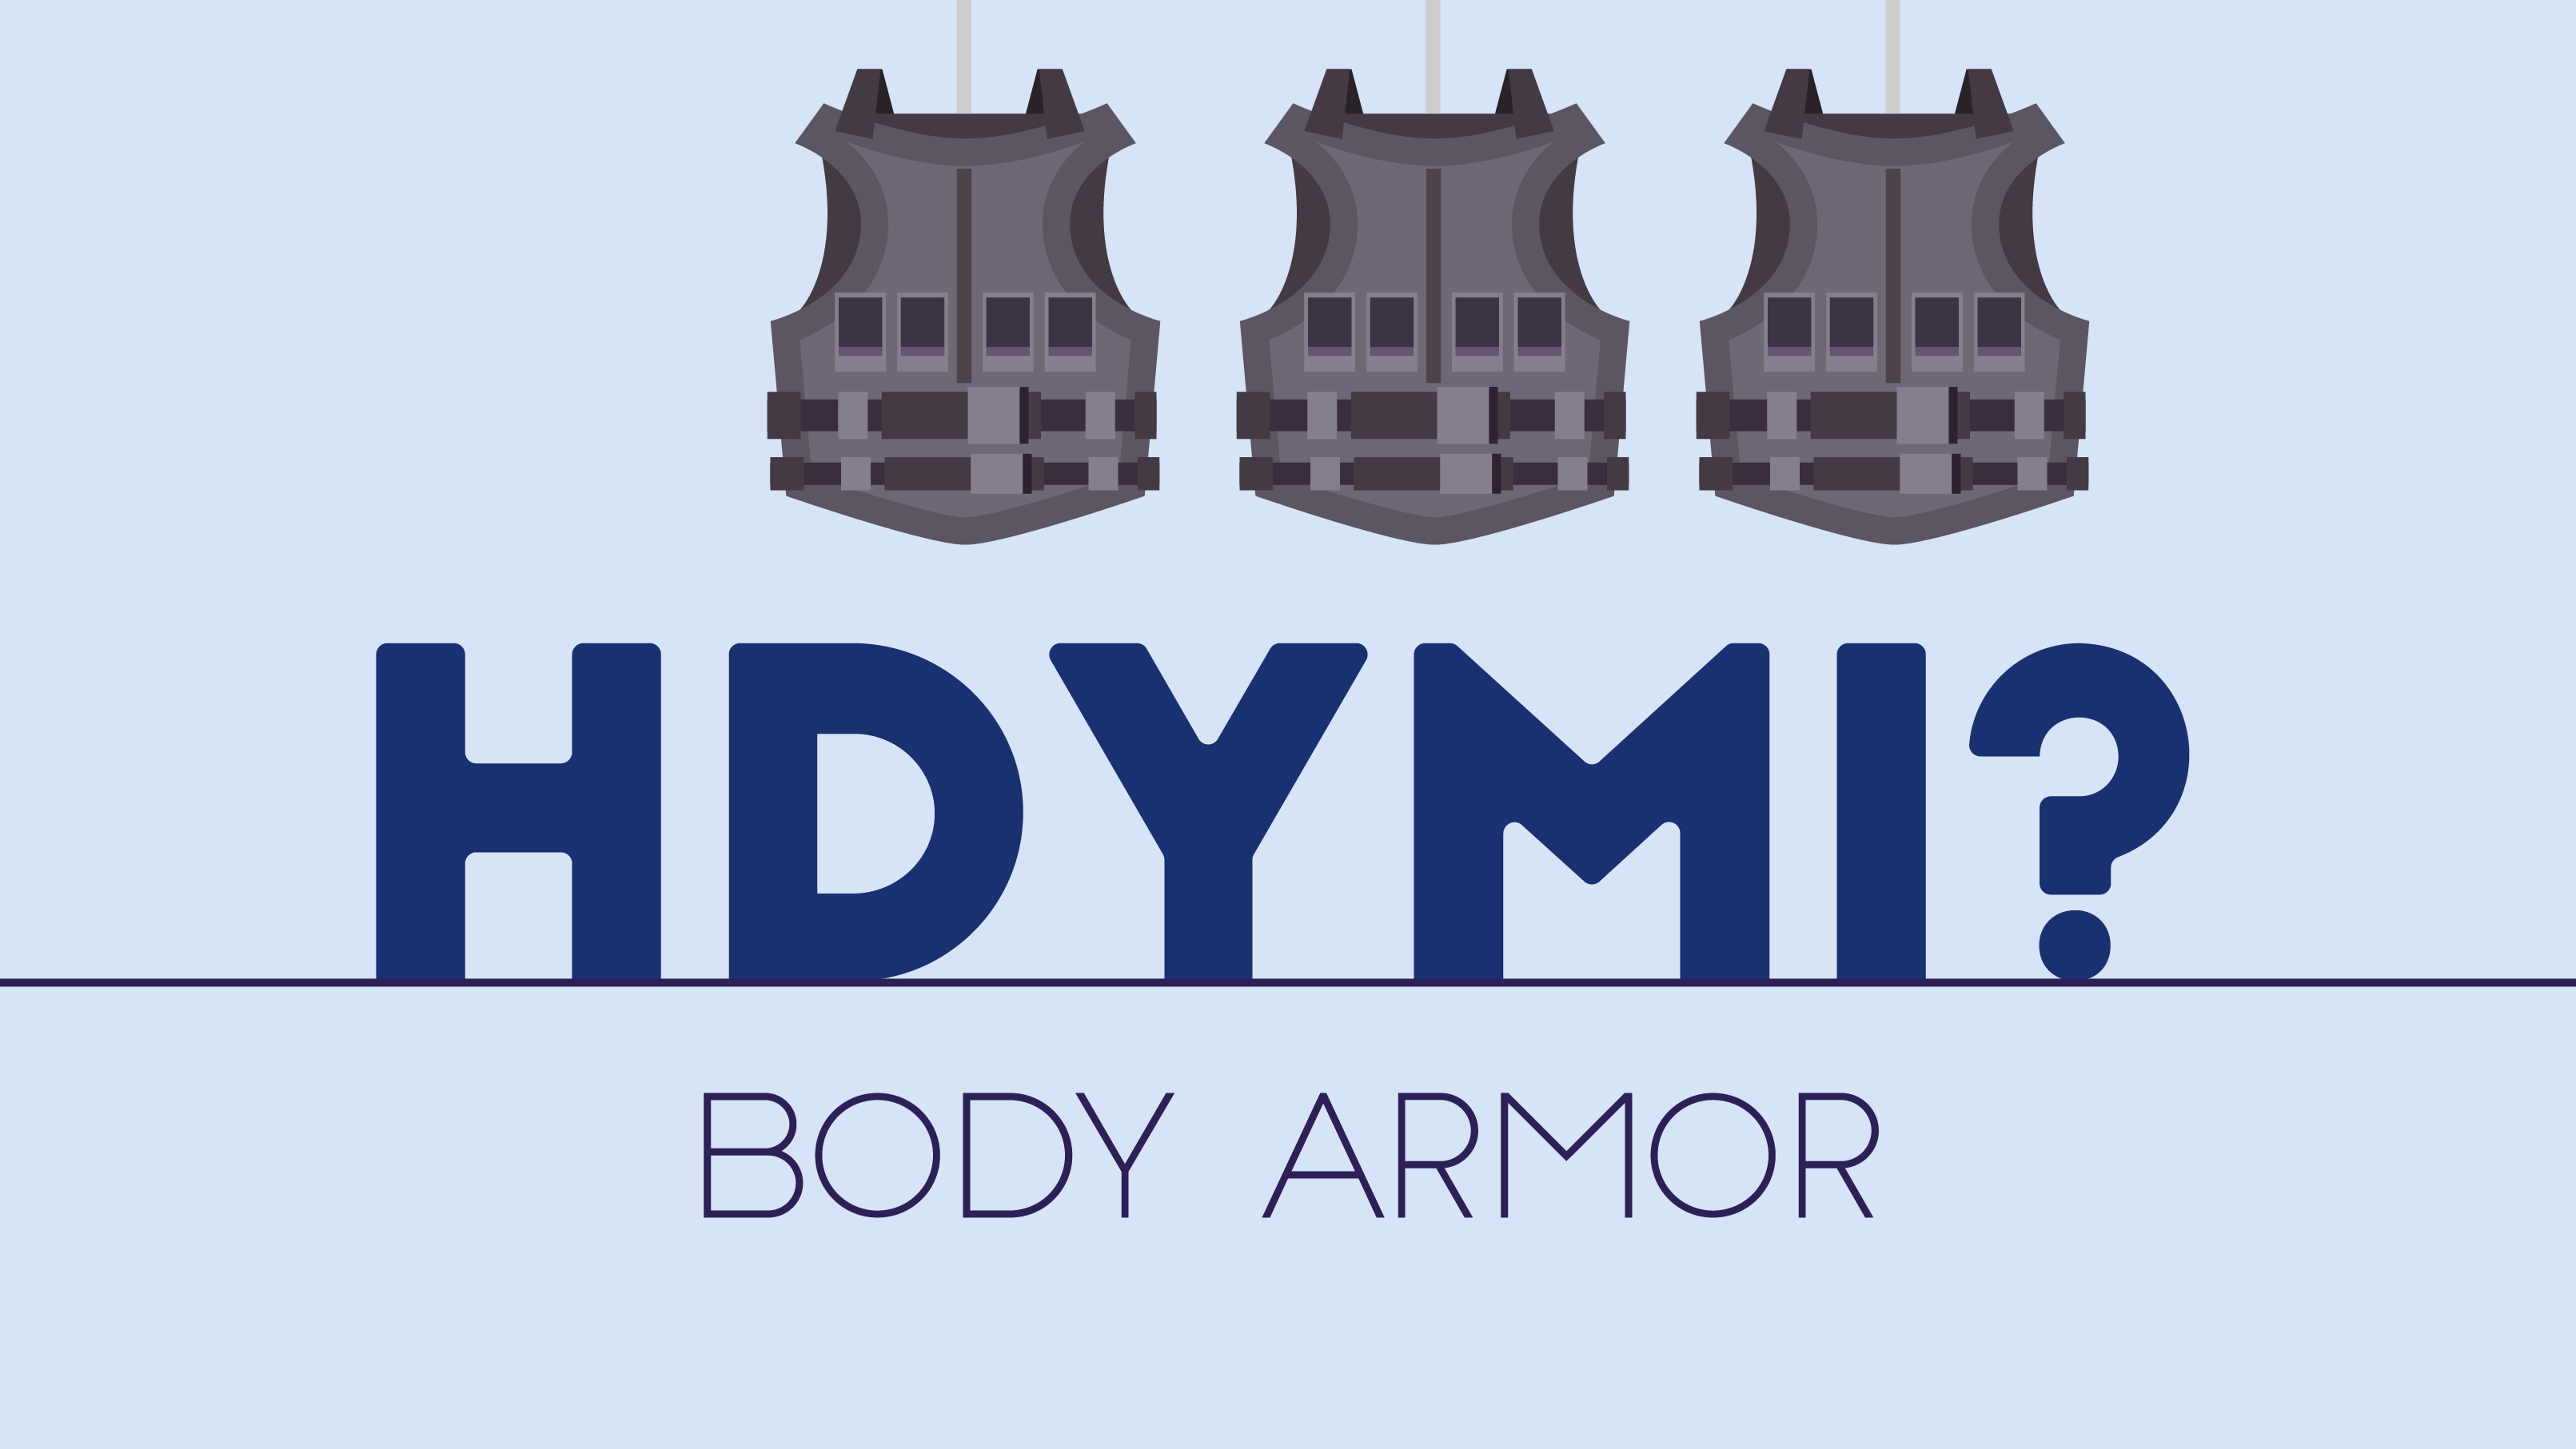 Animated illustration says "HDYMI? Body Armor" with bullets hitting vests and then falling. 